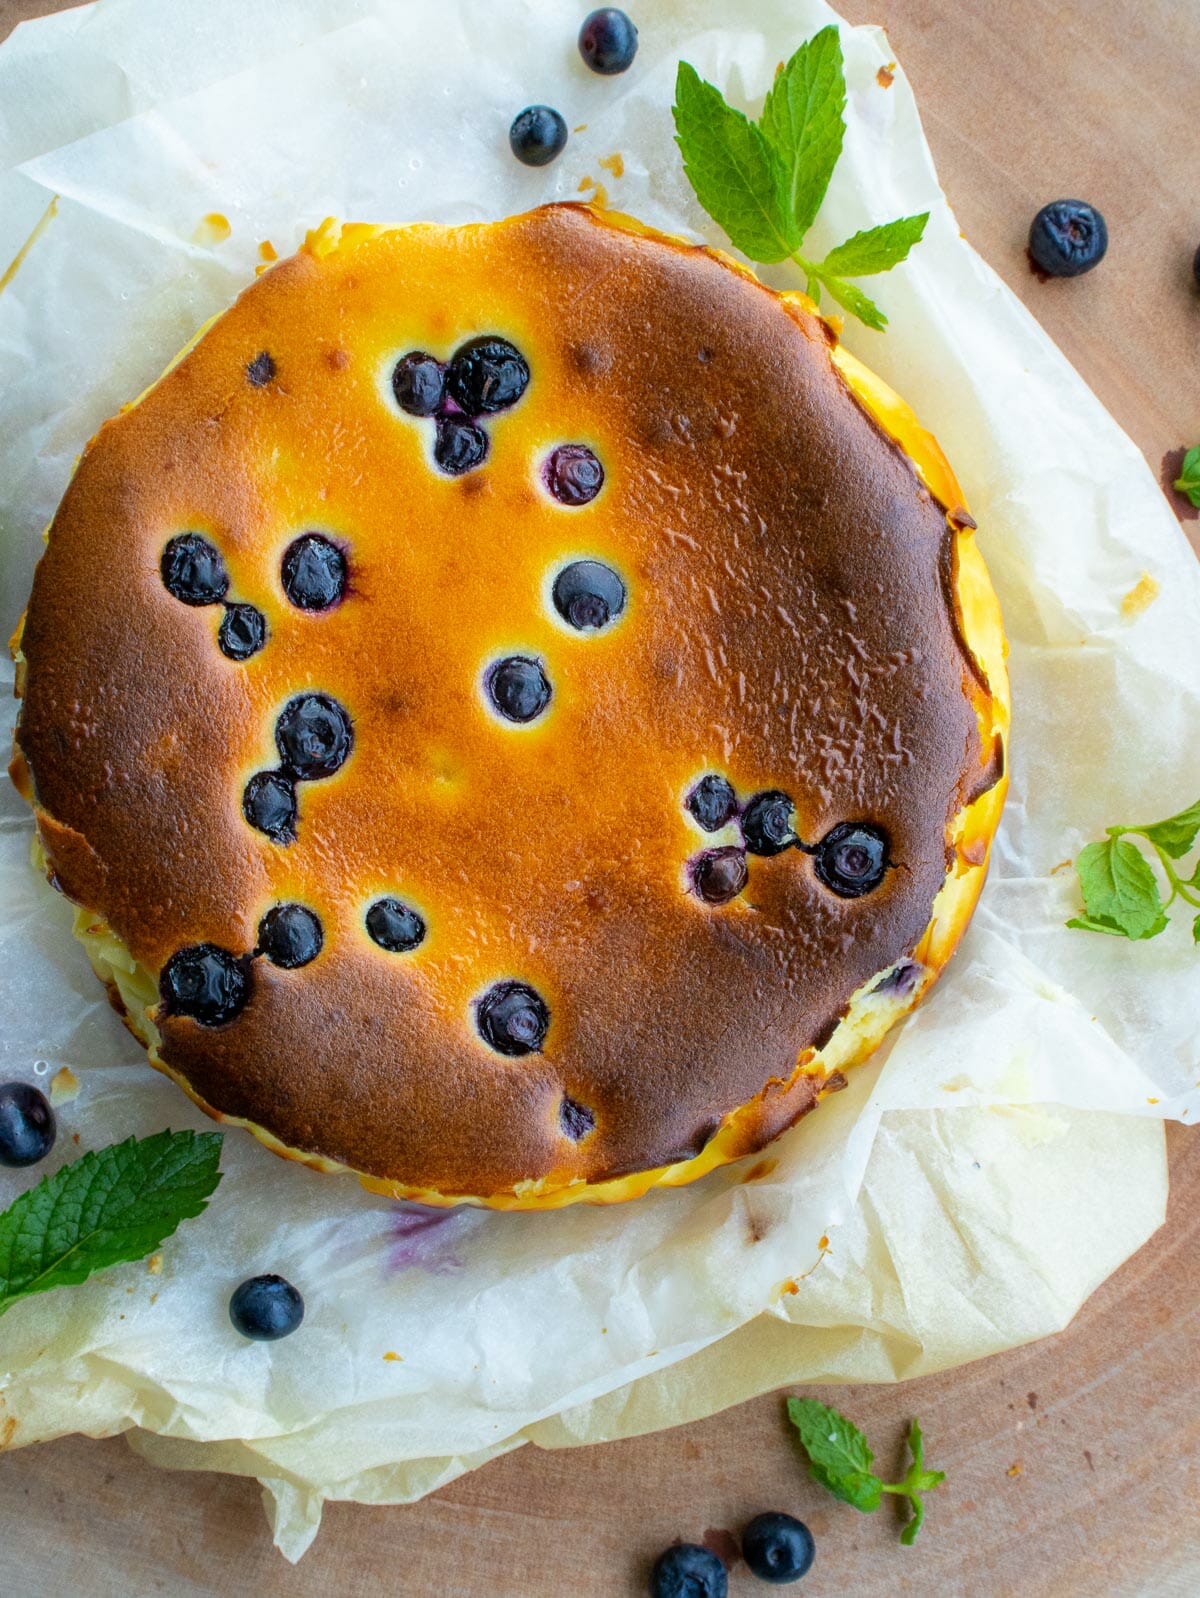 a bird eye view of a whole blueberry cheesecake put on a parchment paper and garnished with mint leaves